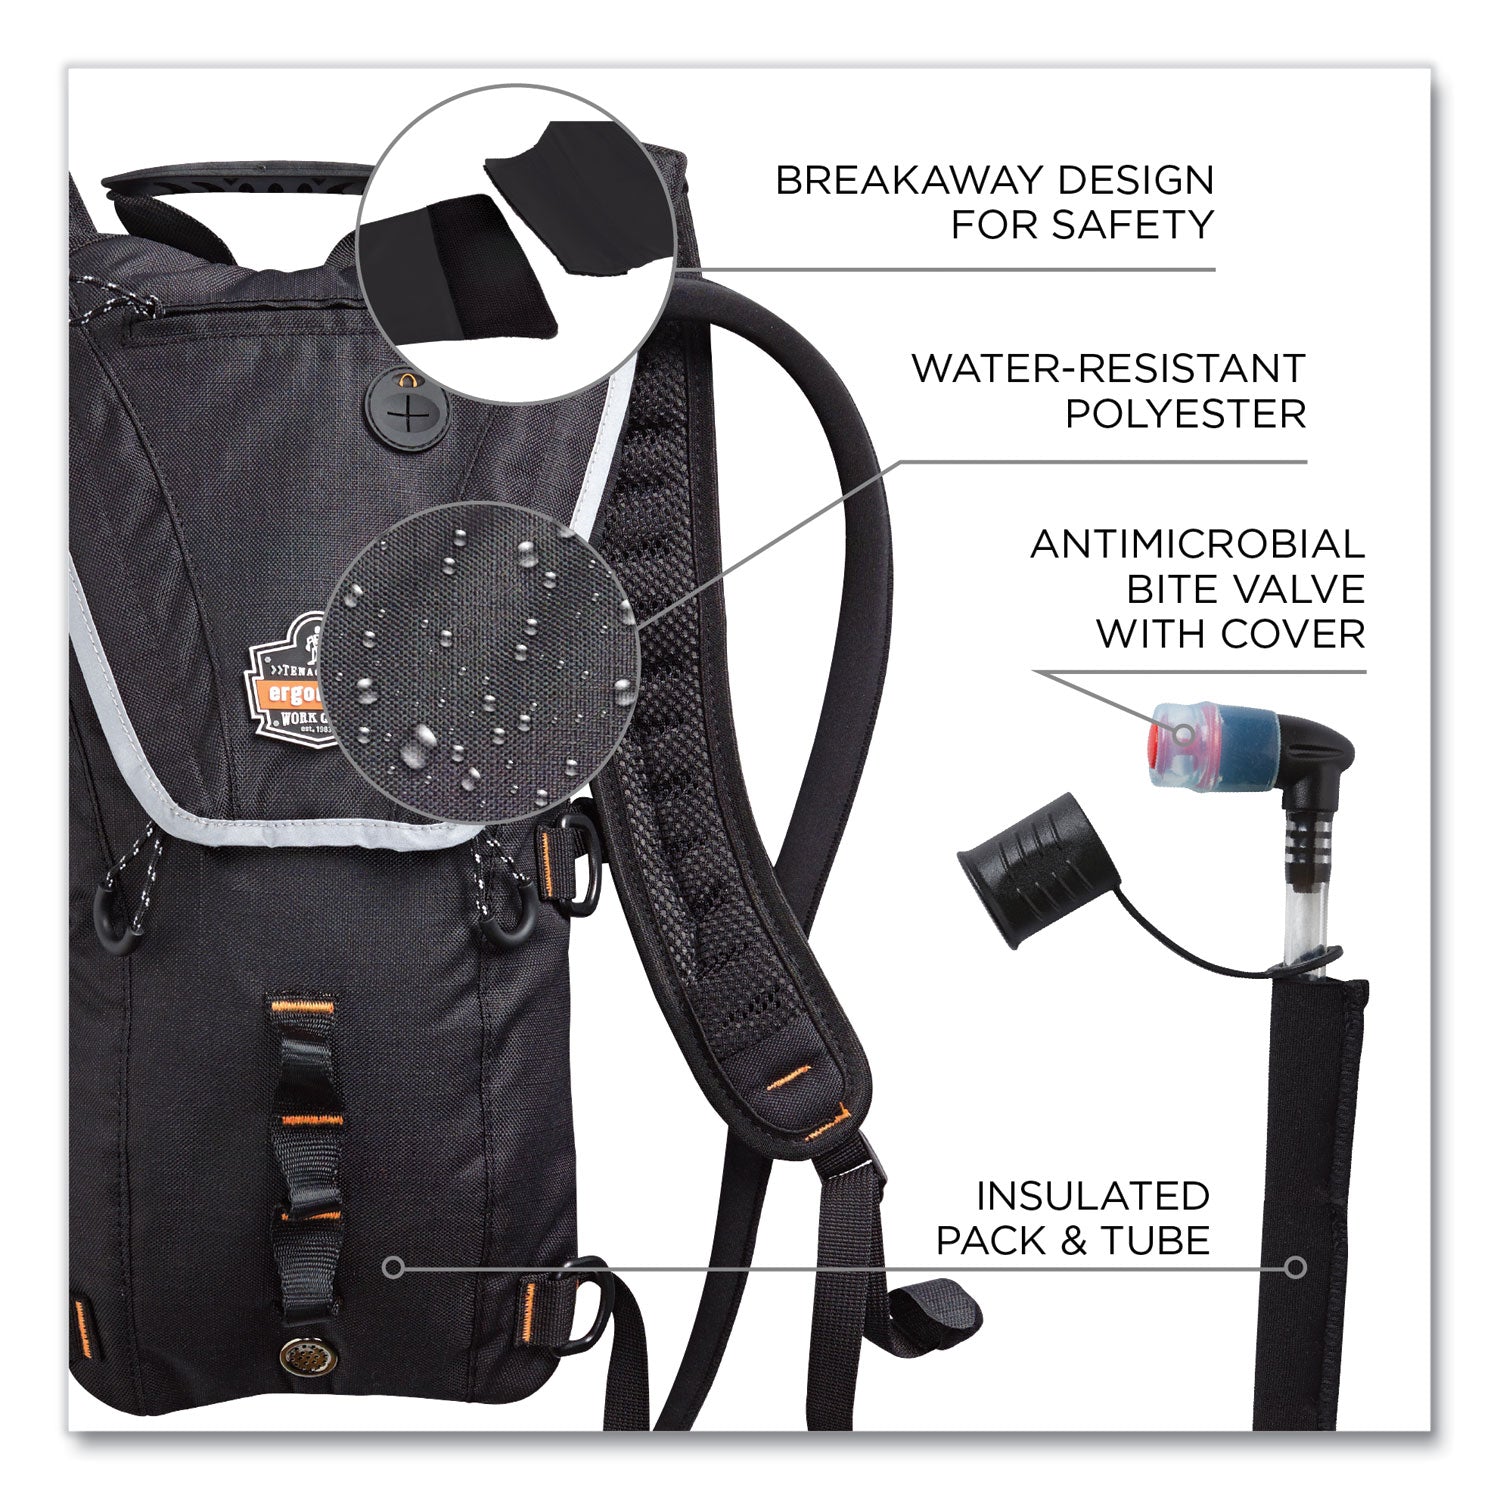 chill-its-5156-low-profile-hydration-pack-3-l-black-ships-in-1-3-business-days_ego13161 - 4